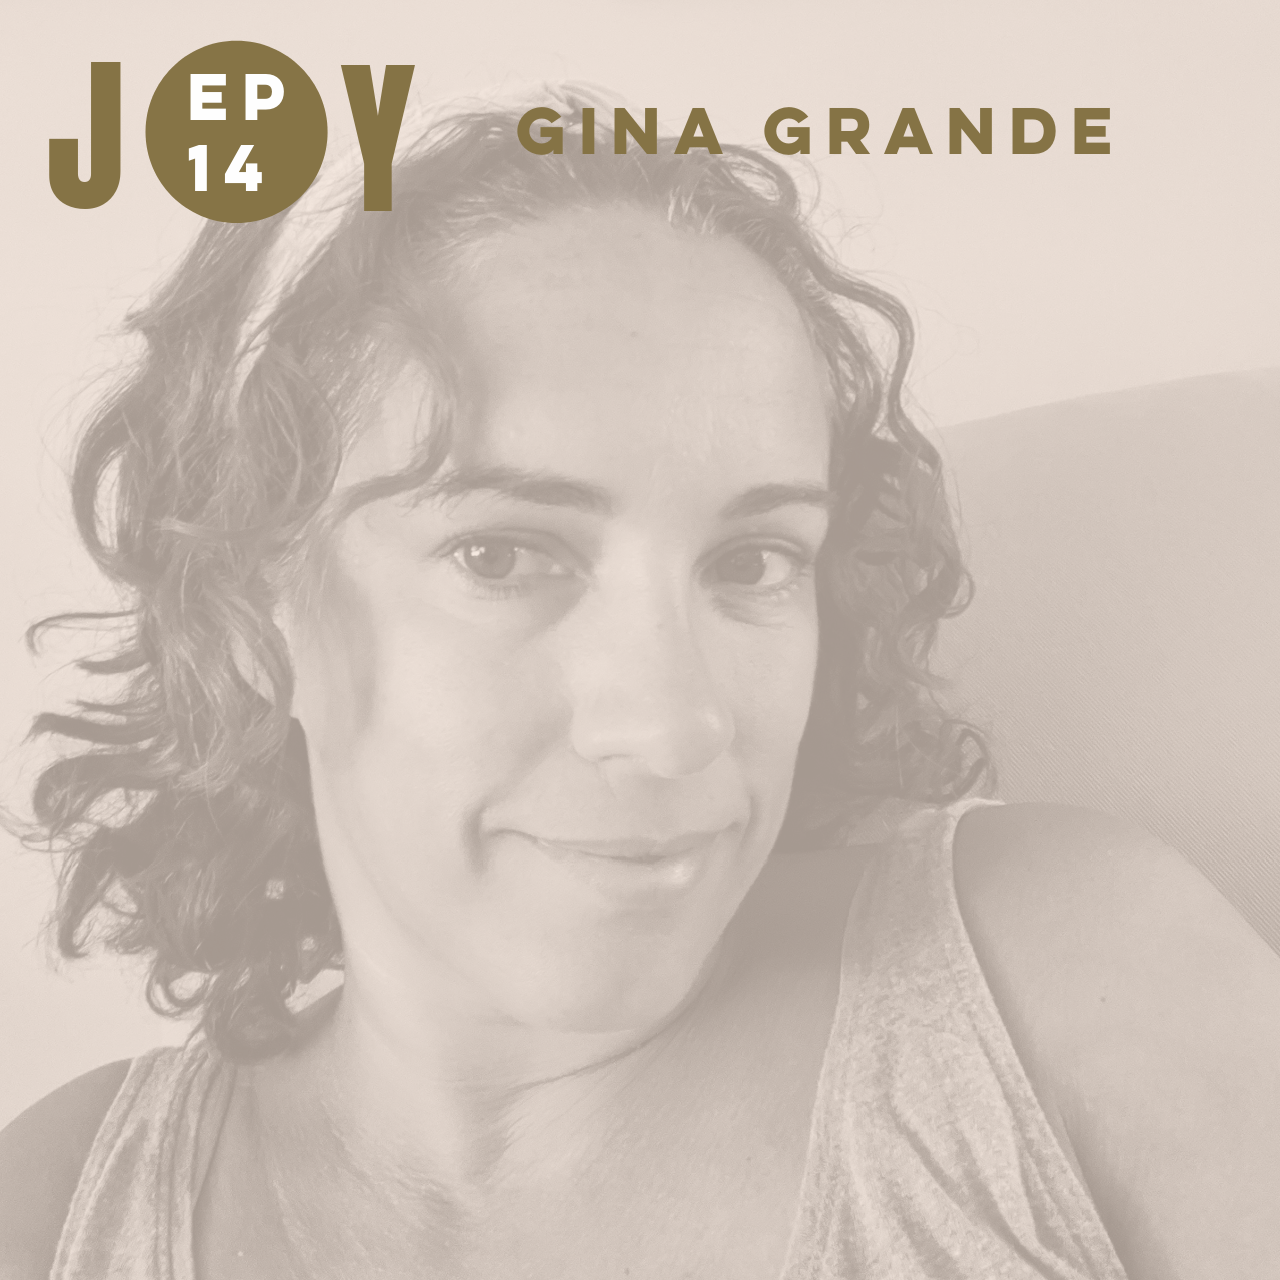 JOY IS NOW: THESE THREE THINGS WITH GINA GRANDE